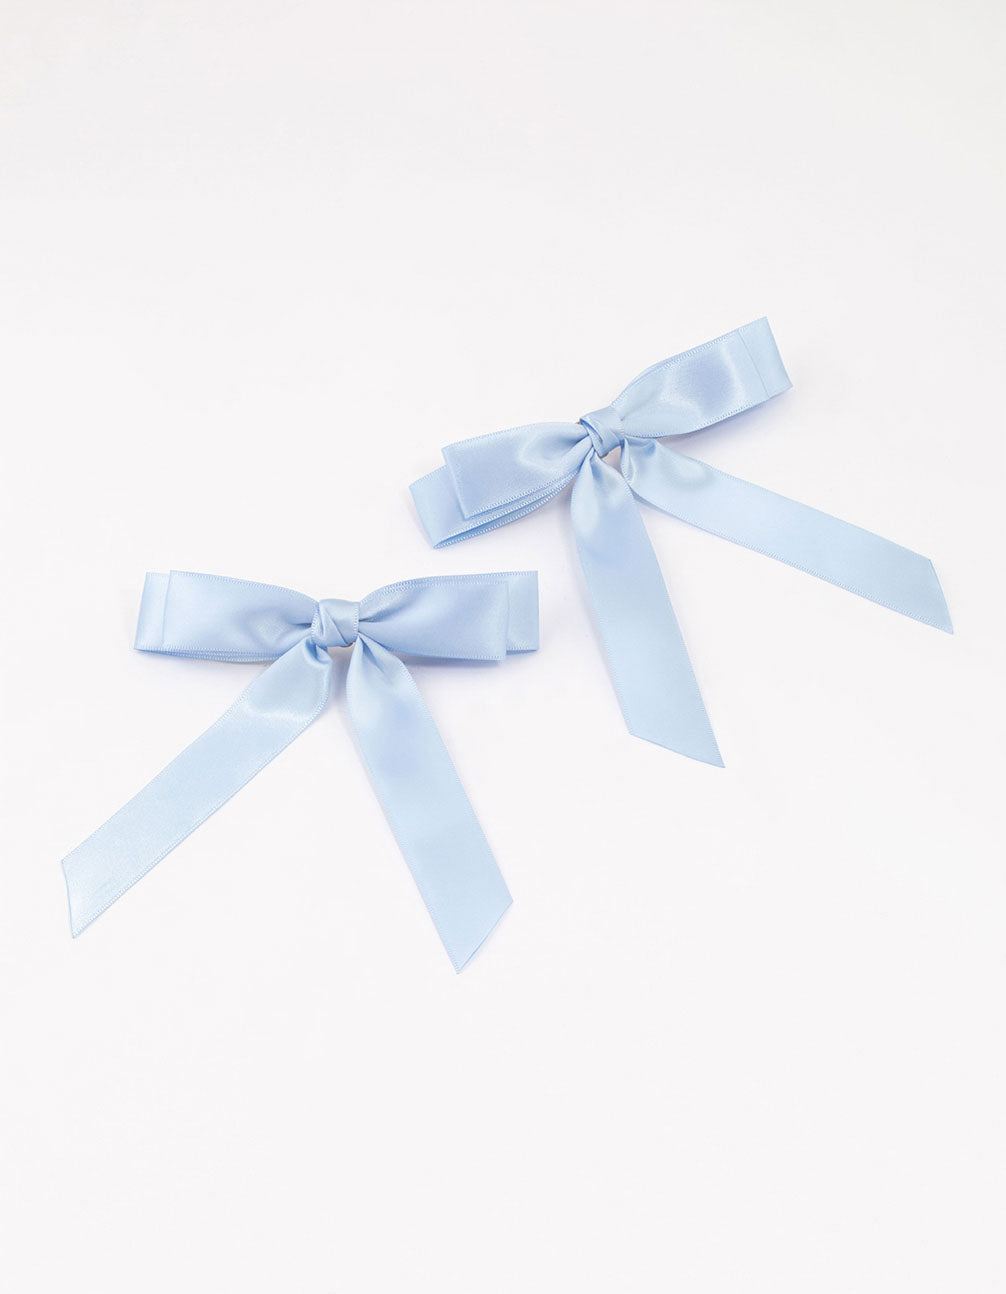 Wide Satin Ribbon Peacock Blue Ribbon for Gift Wrapping,23m Satin Ribbon 4  inch Fabric Ribbon Wide Ribbon,10cm Thick Ribbon Large Blue Bow Ribbon for